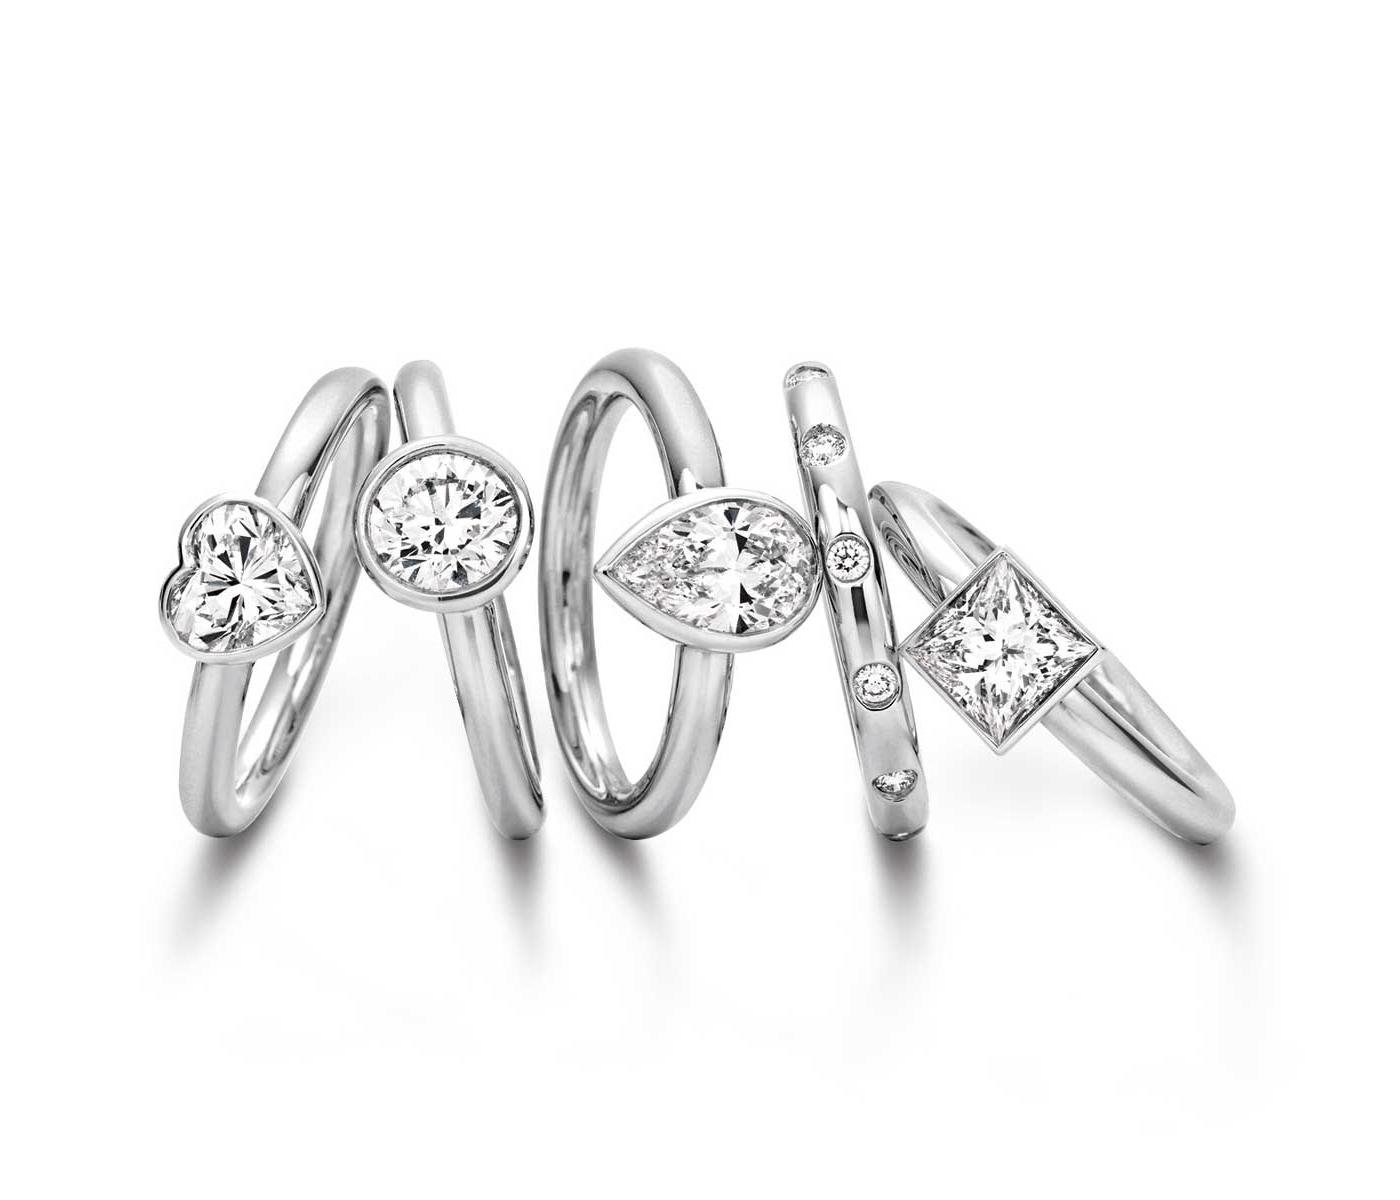 Rings by Tiffany & Co